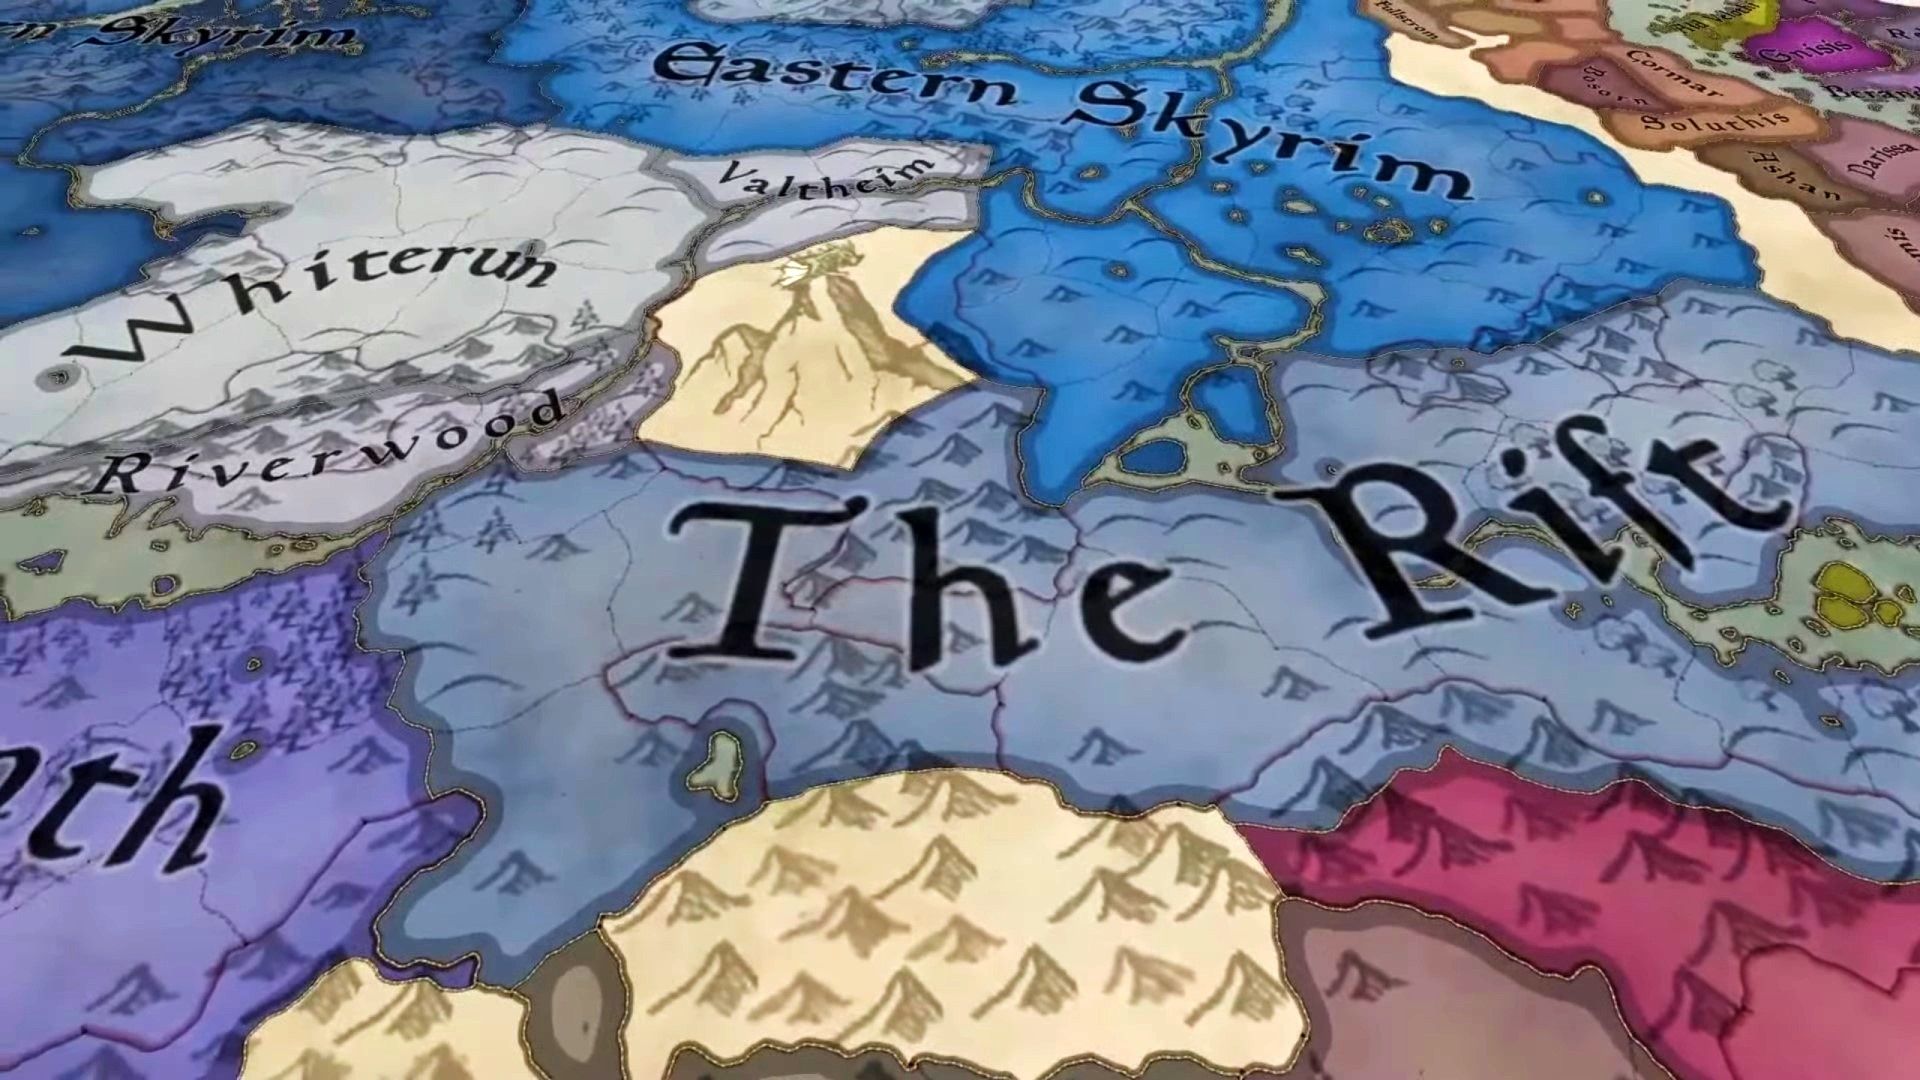 The Elder Scrolls mod for Crusader Kings 3 will add character-specific storylines